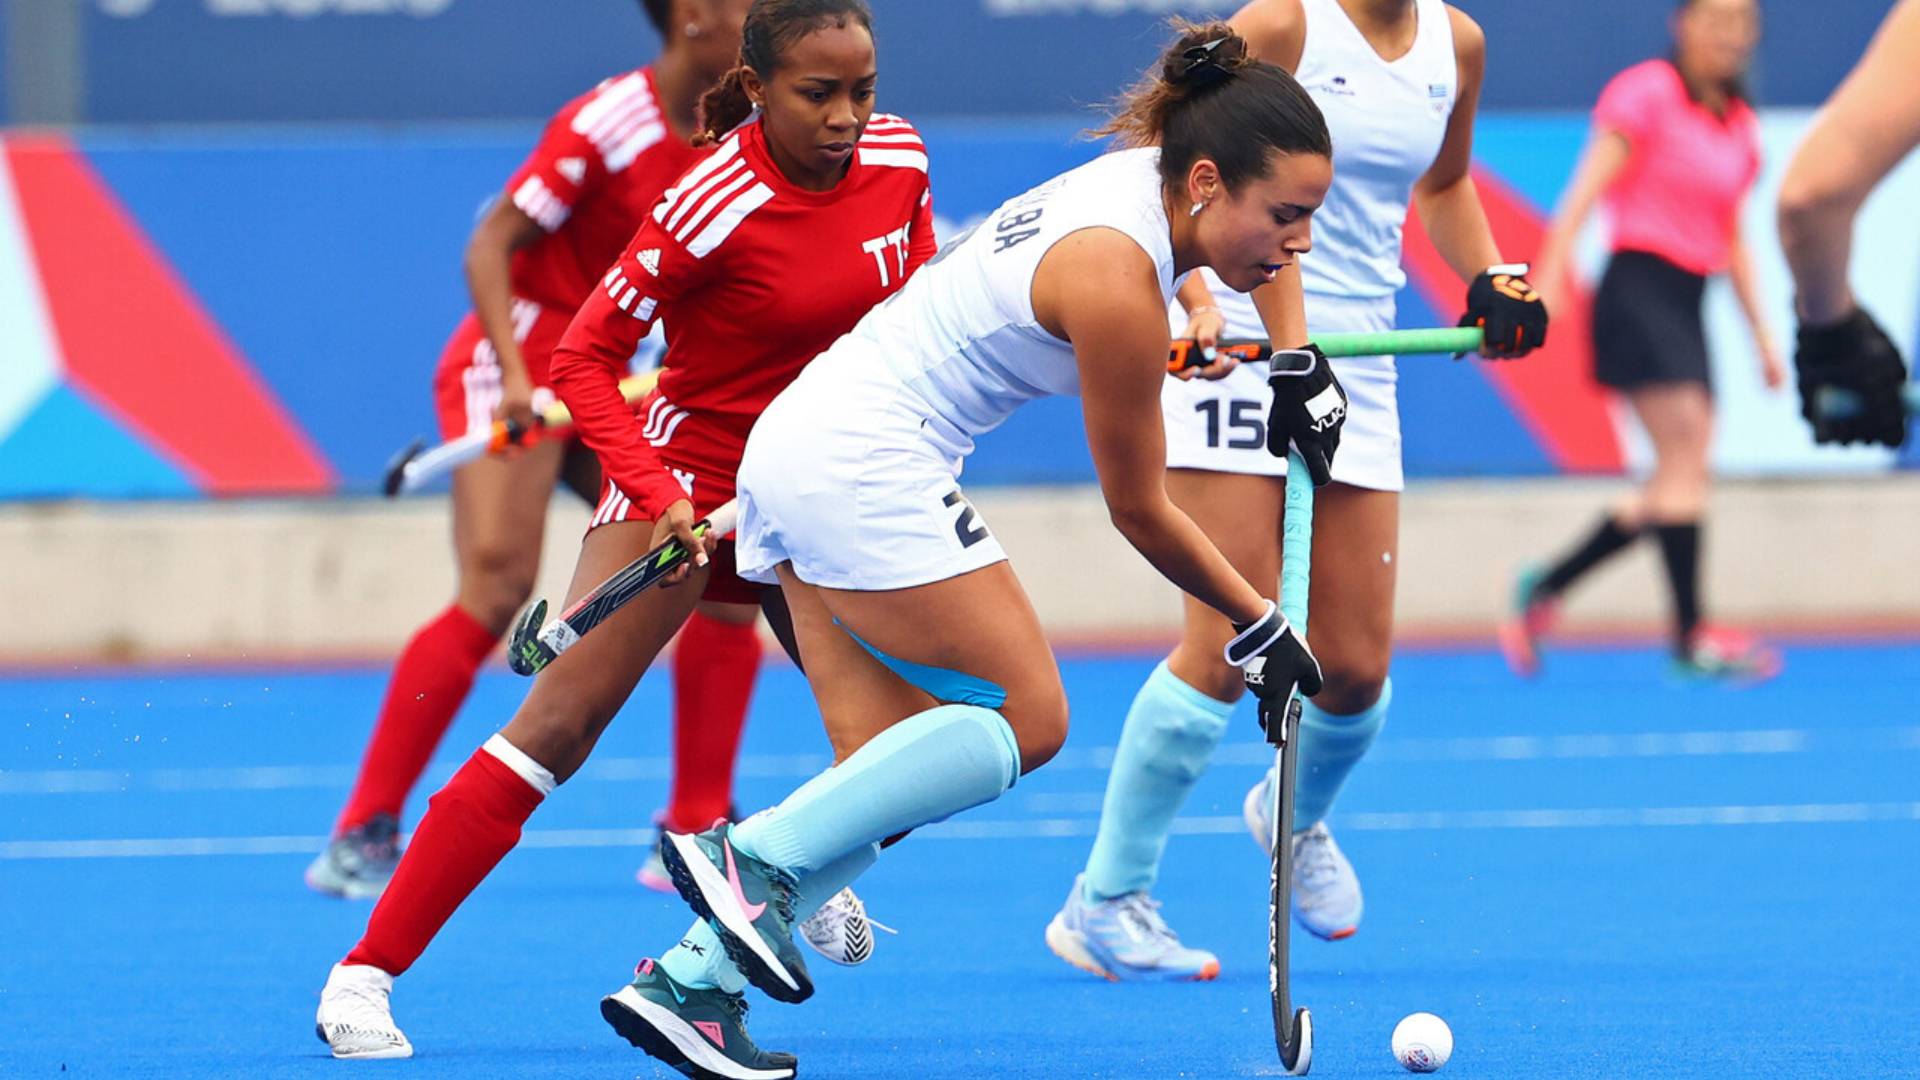 Uruguay recovers in female's field hockey with a win over Trinidad and Tobago